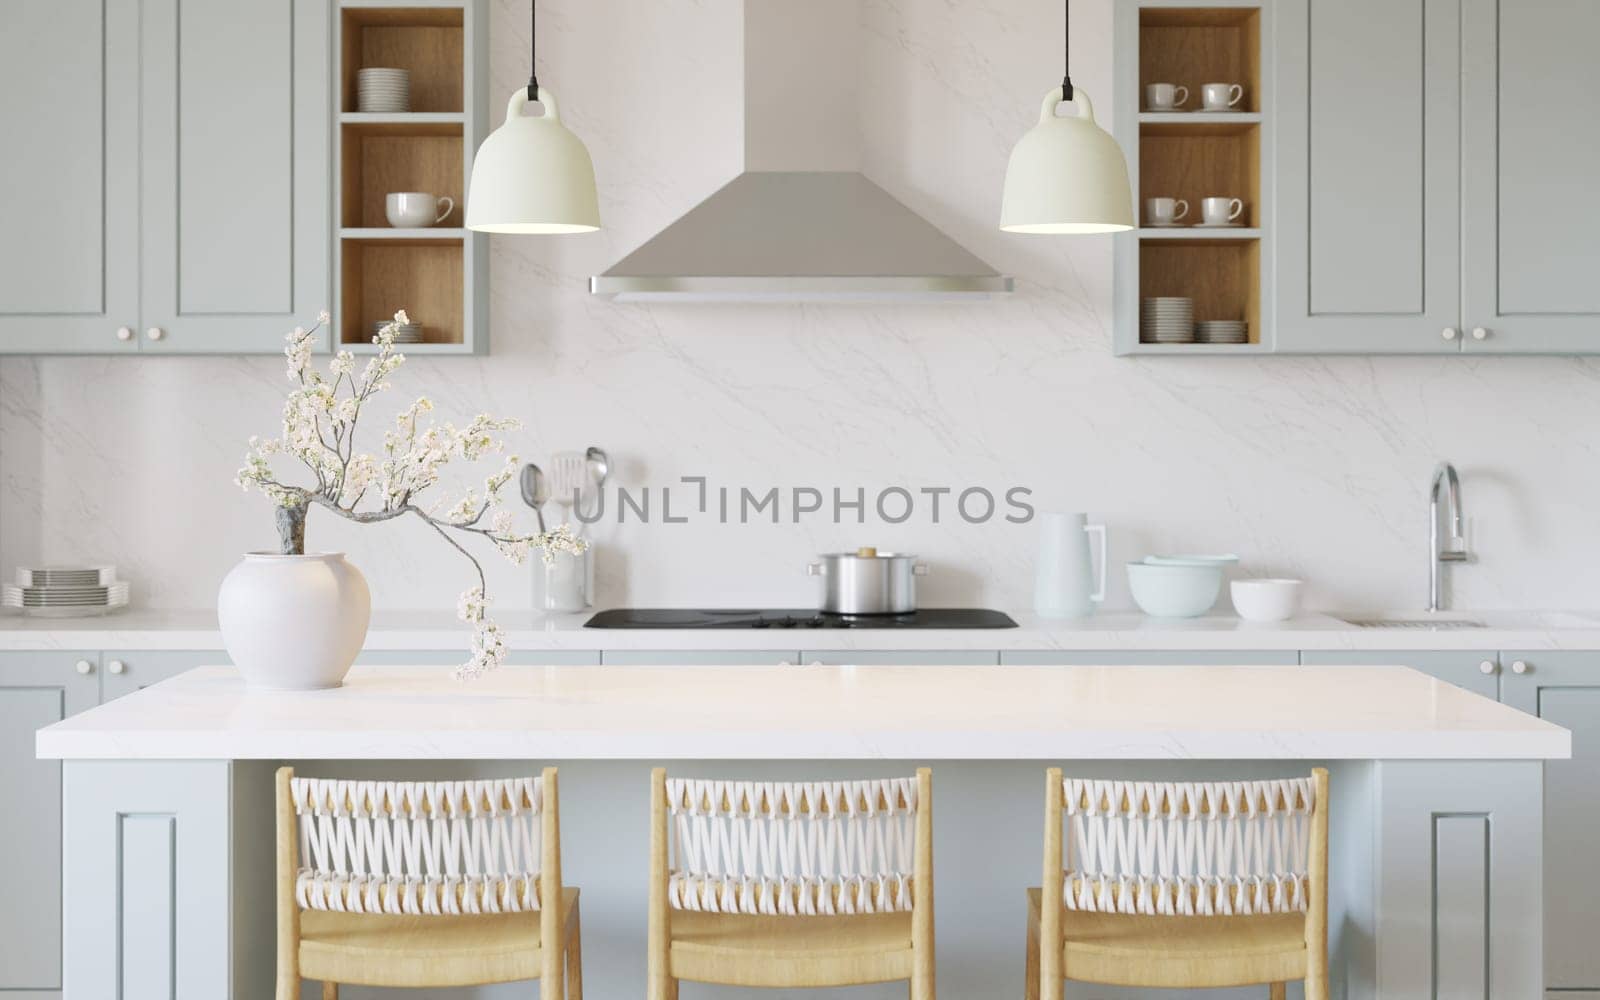 Blue kitchen interior with island. Stylish kitchen with white countertops. Cozy bright kitchen with utensils and appliances. Working space of the kitchen. 3D render